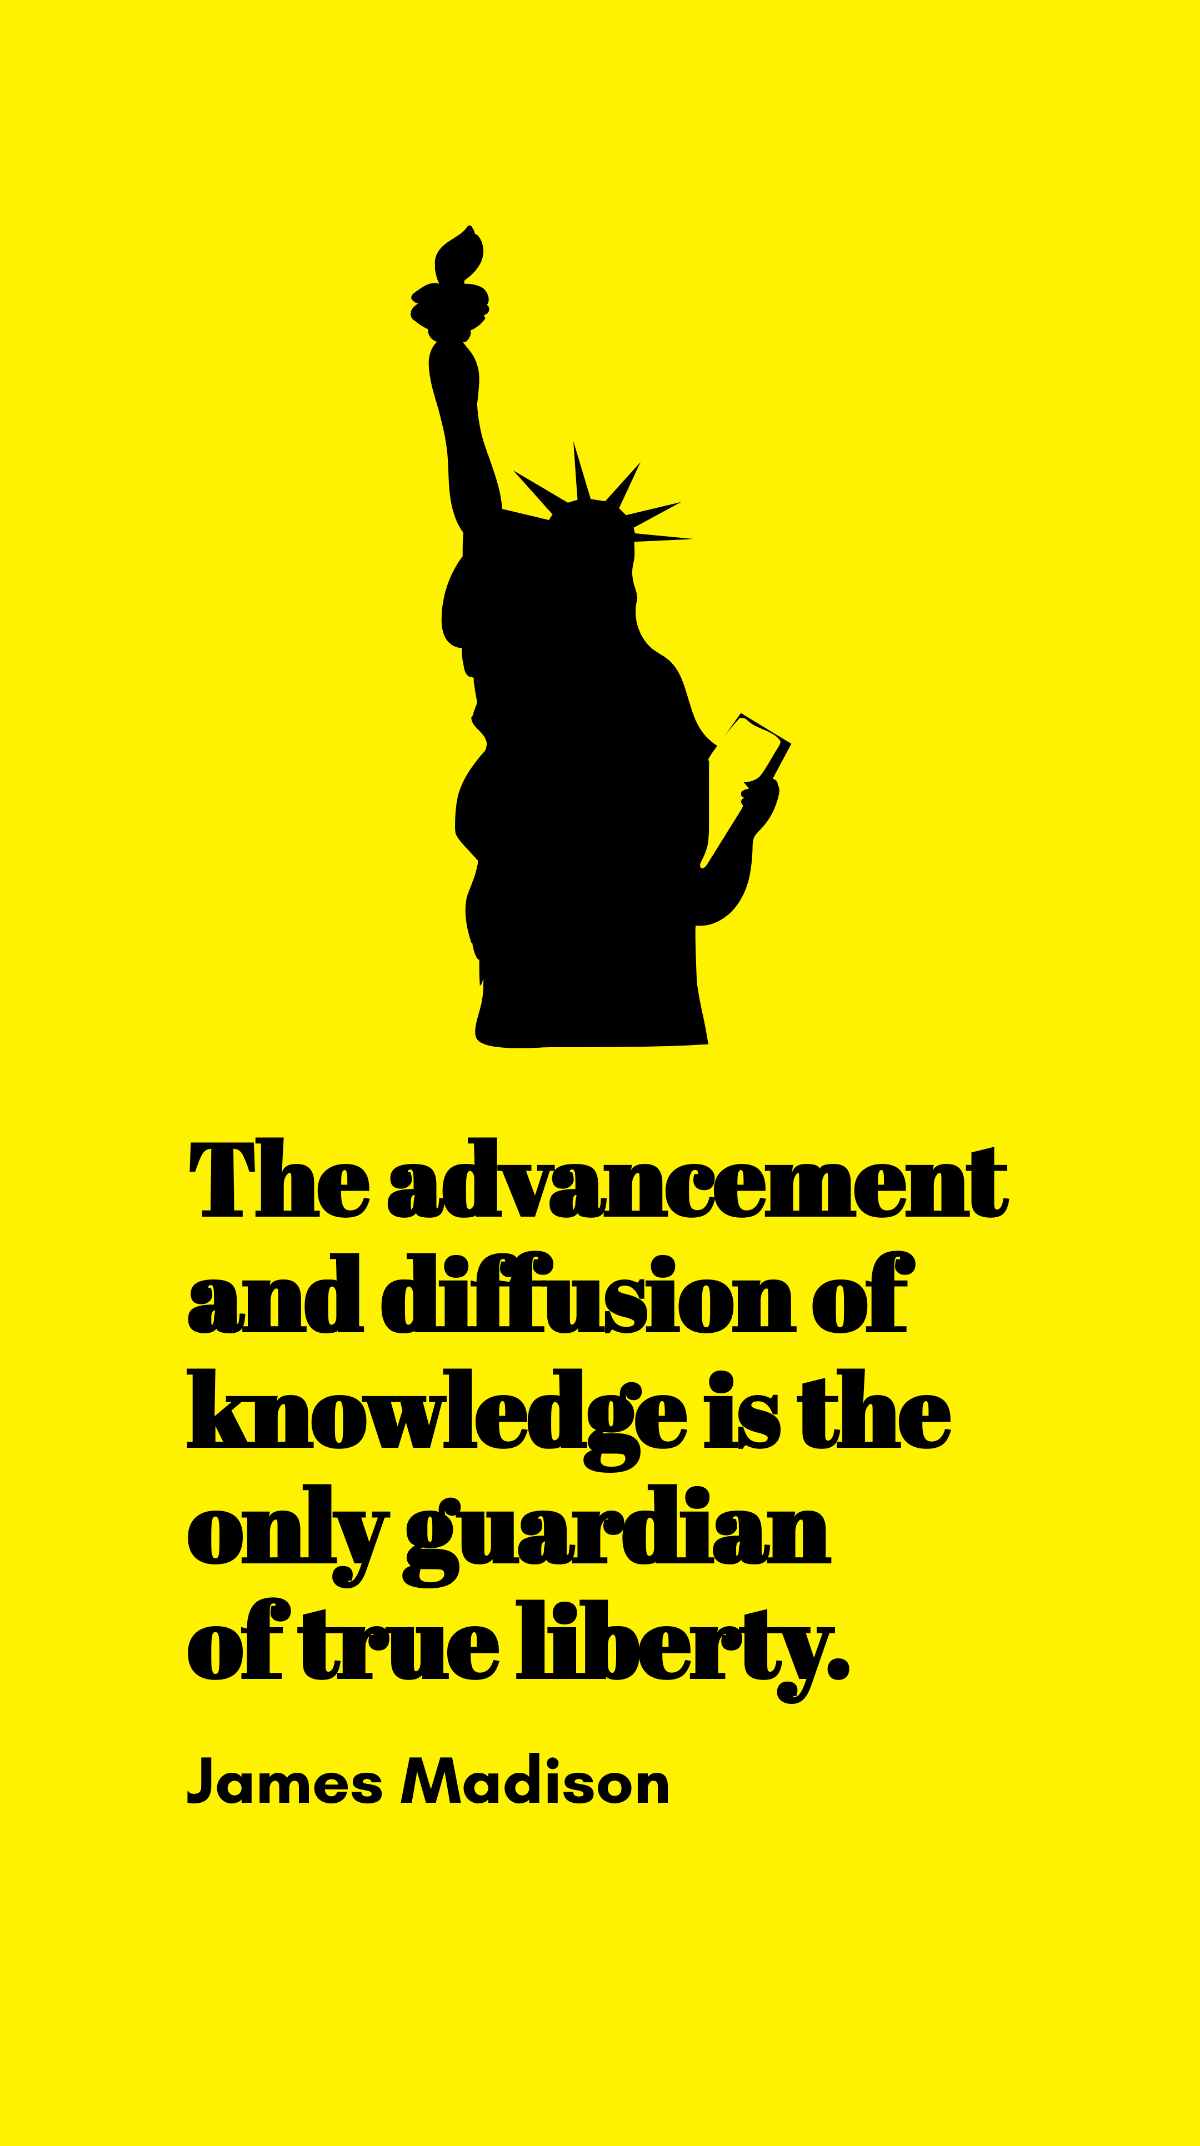 James Madison - The advancement and diffusion of knowledge is the only guardian of true liberty. Template